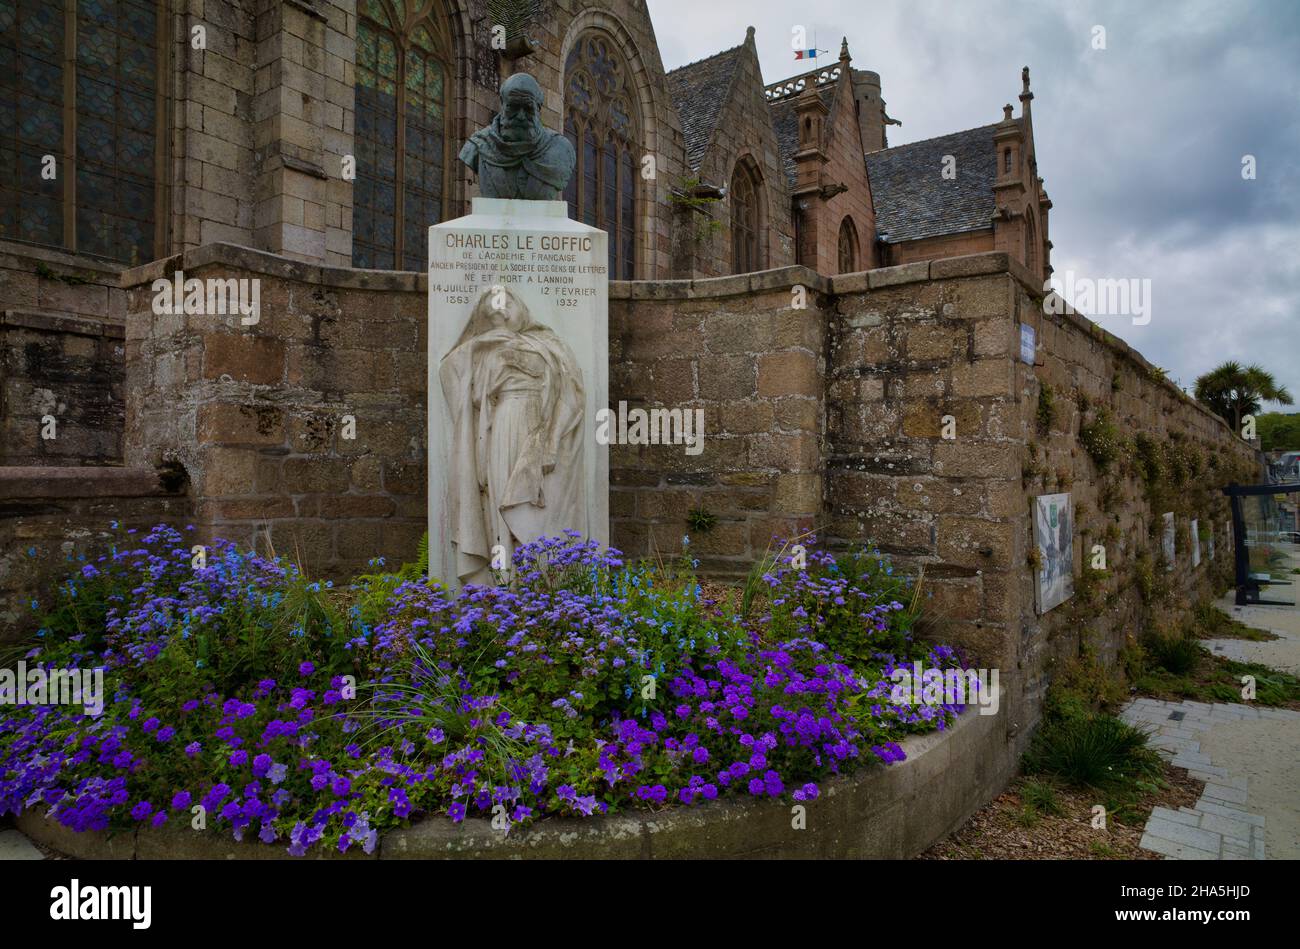 memorial to poet charles le goffic in front of église saint-jean-du-baly church,lannion (breton lannuon),cotes-d'armor,brittany,france Stock Photo